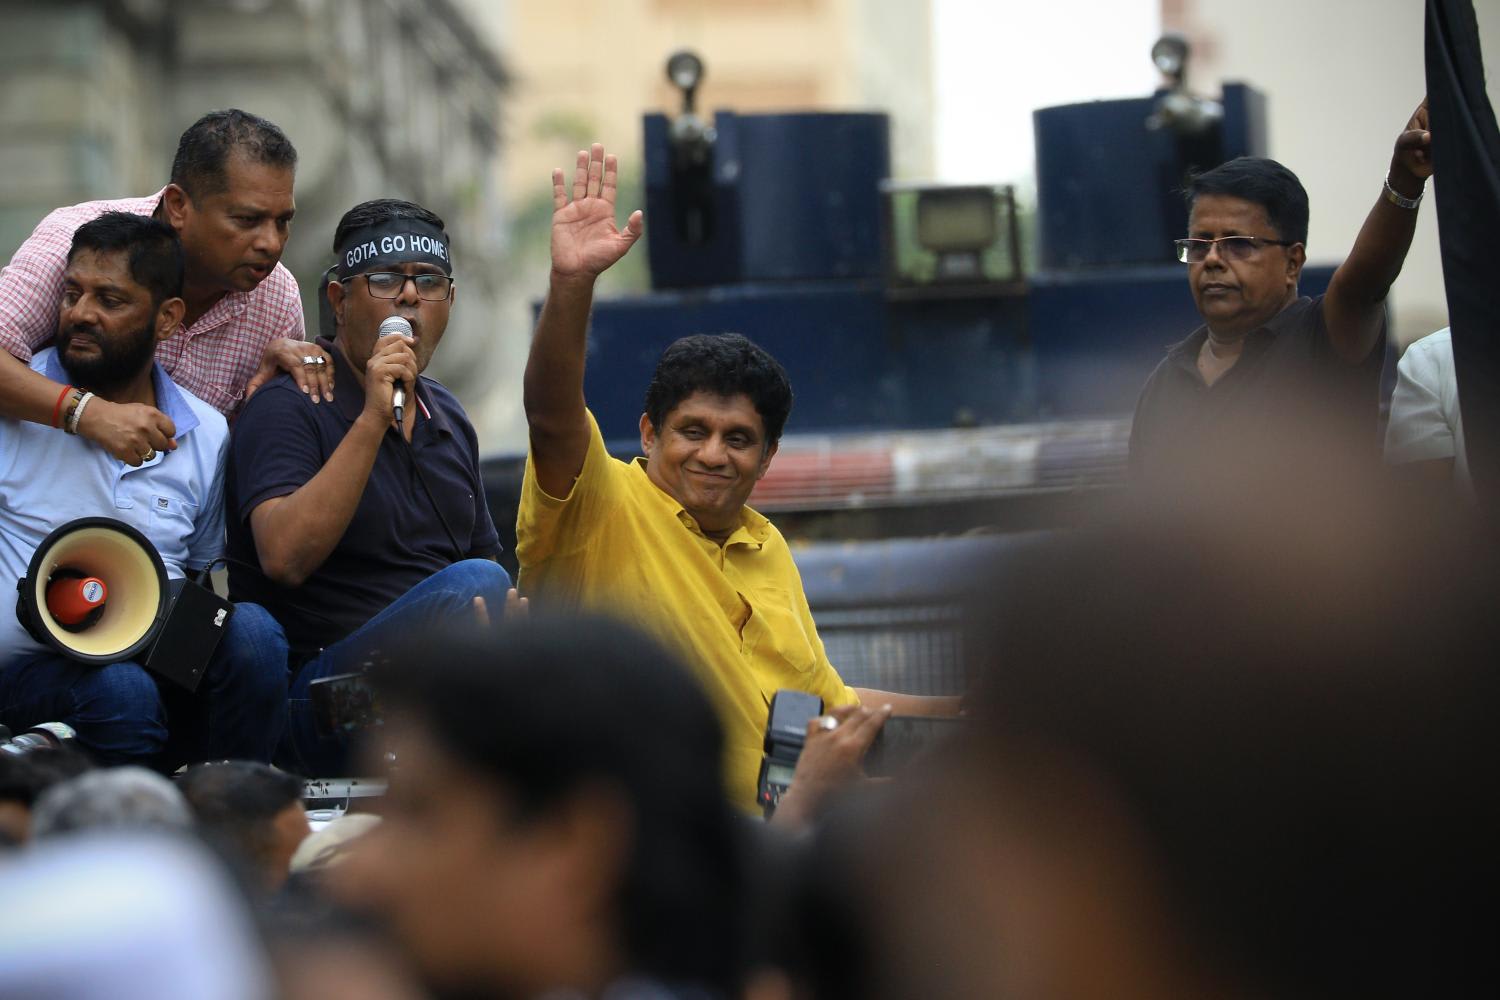 Sri Lanka opposition leader&nbsp;Sajith&nbsp;Premadasa&nbsp;acknowledges his supporters after stepping in to a barricade to protest in front of president Gotabaya Rajapaksa's official residence demanding president's resignation at Colombo, Sri Lanka on June 30, 2022.